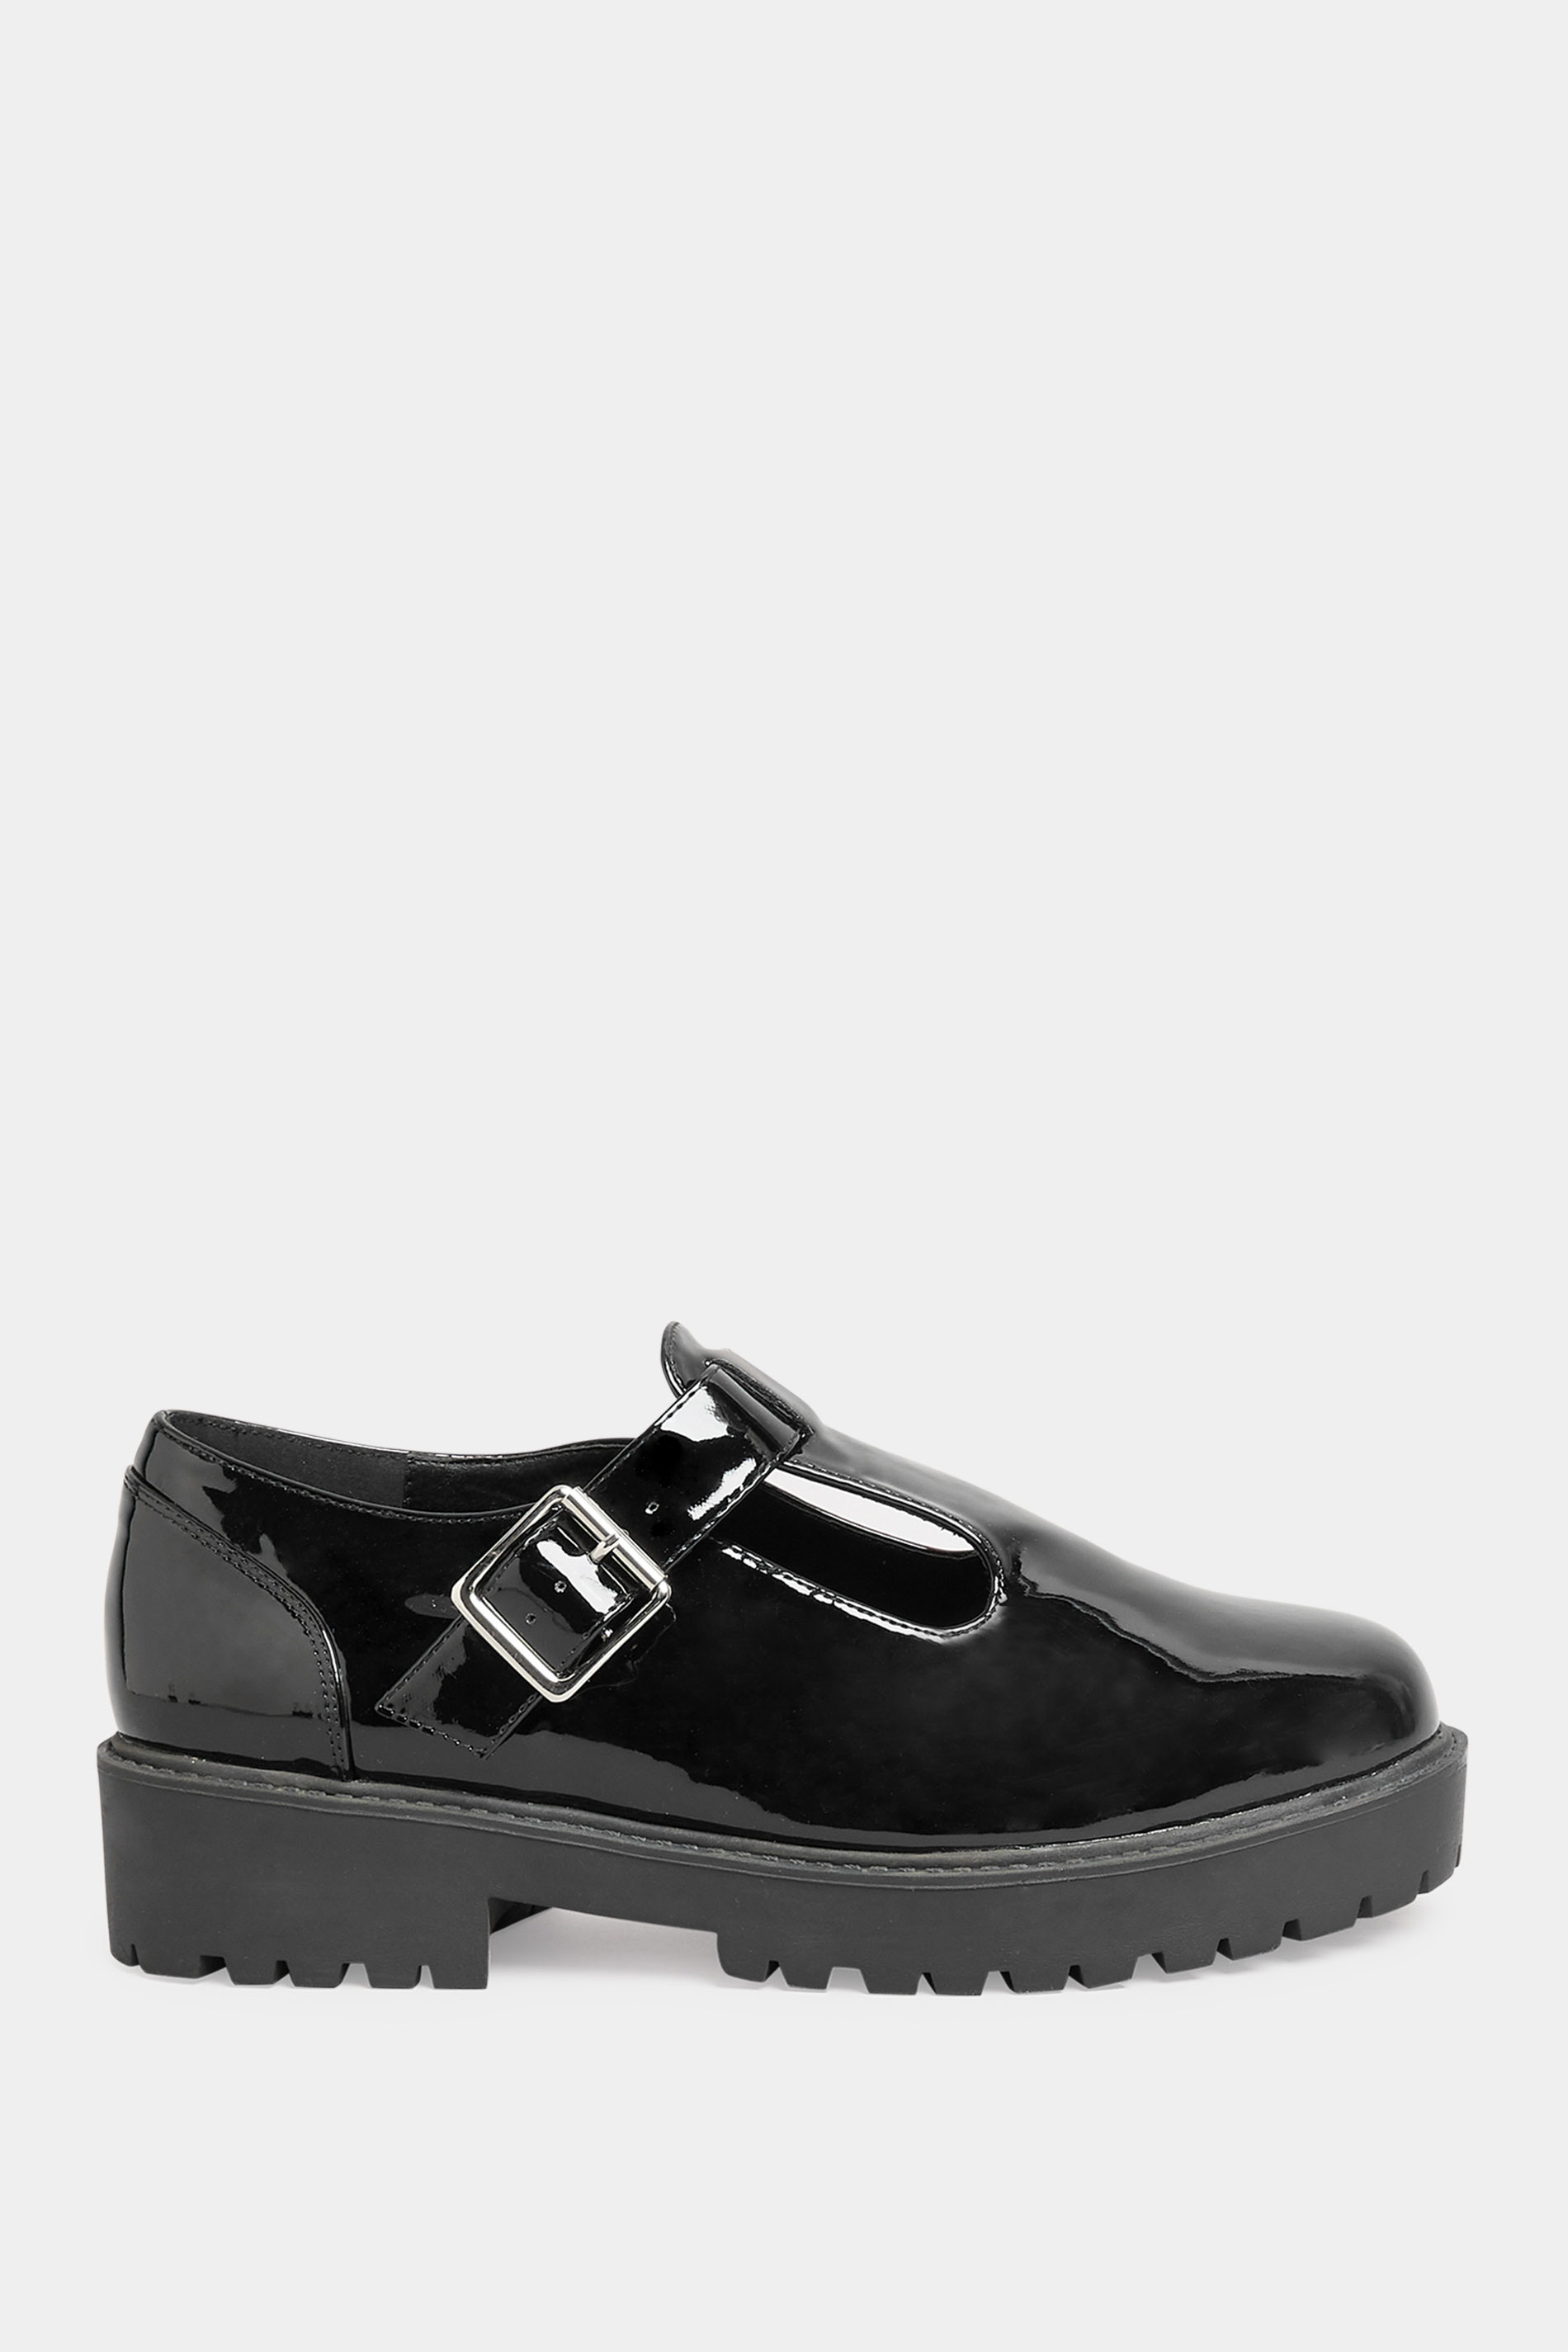 Black Patent Chunky T Bar Mary Jane Shoes In Extra Wide EEE Fit | Yours Clothing 3